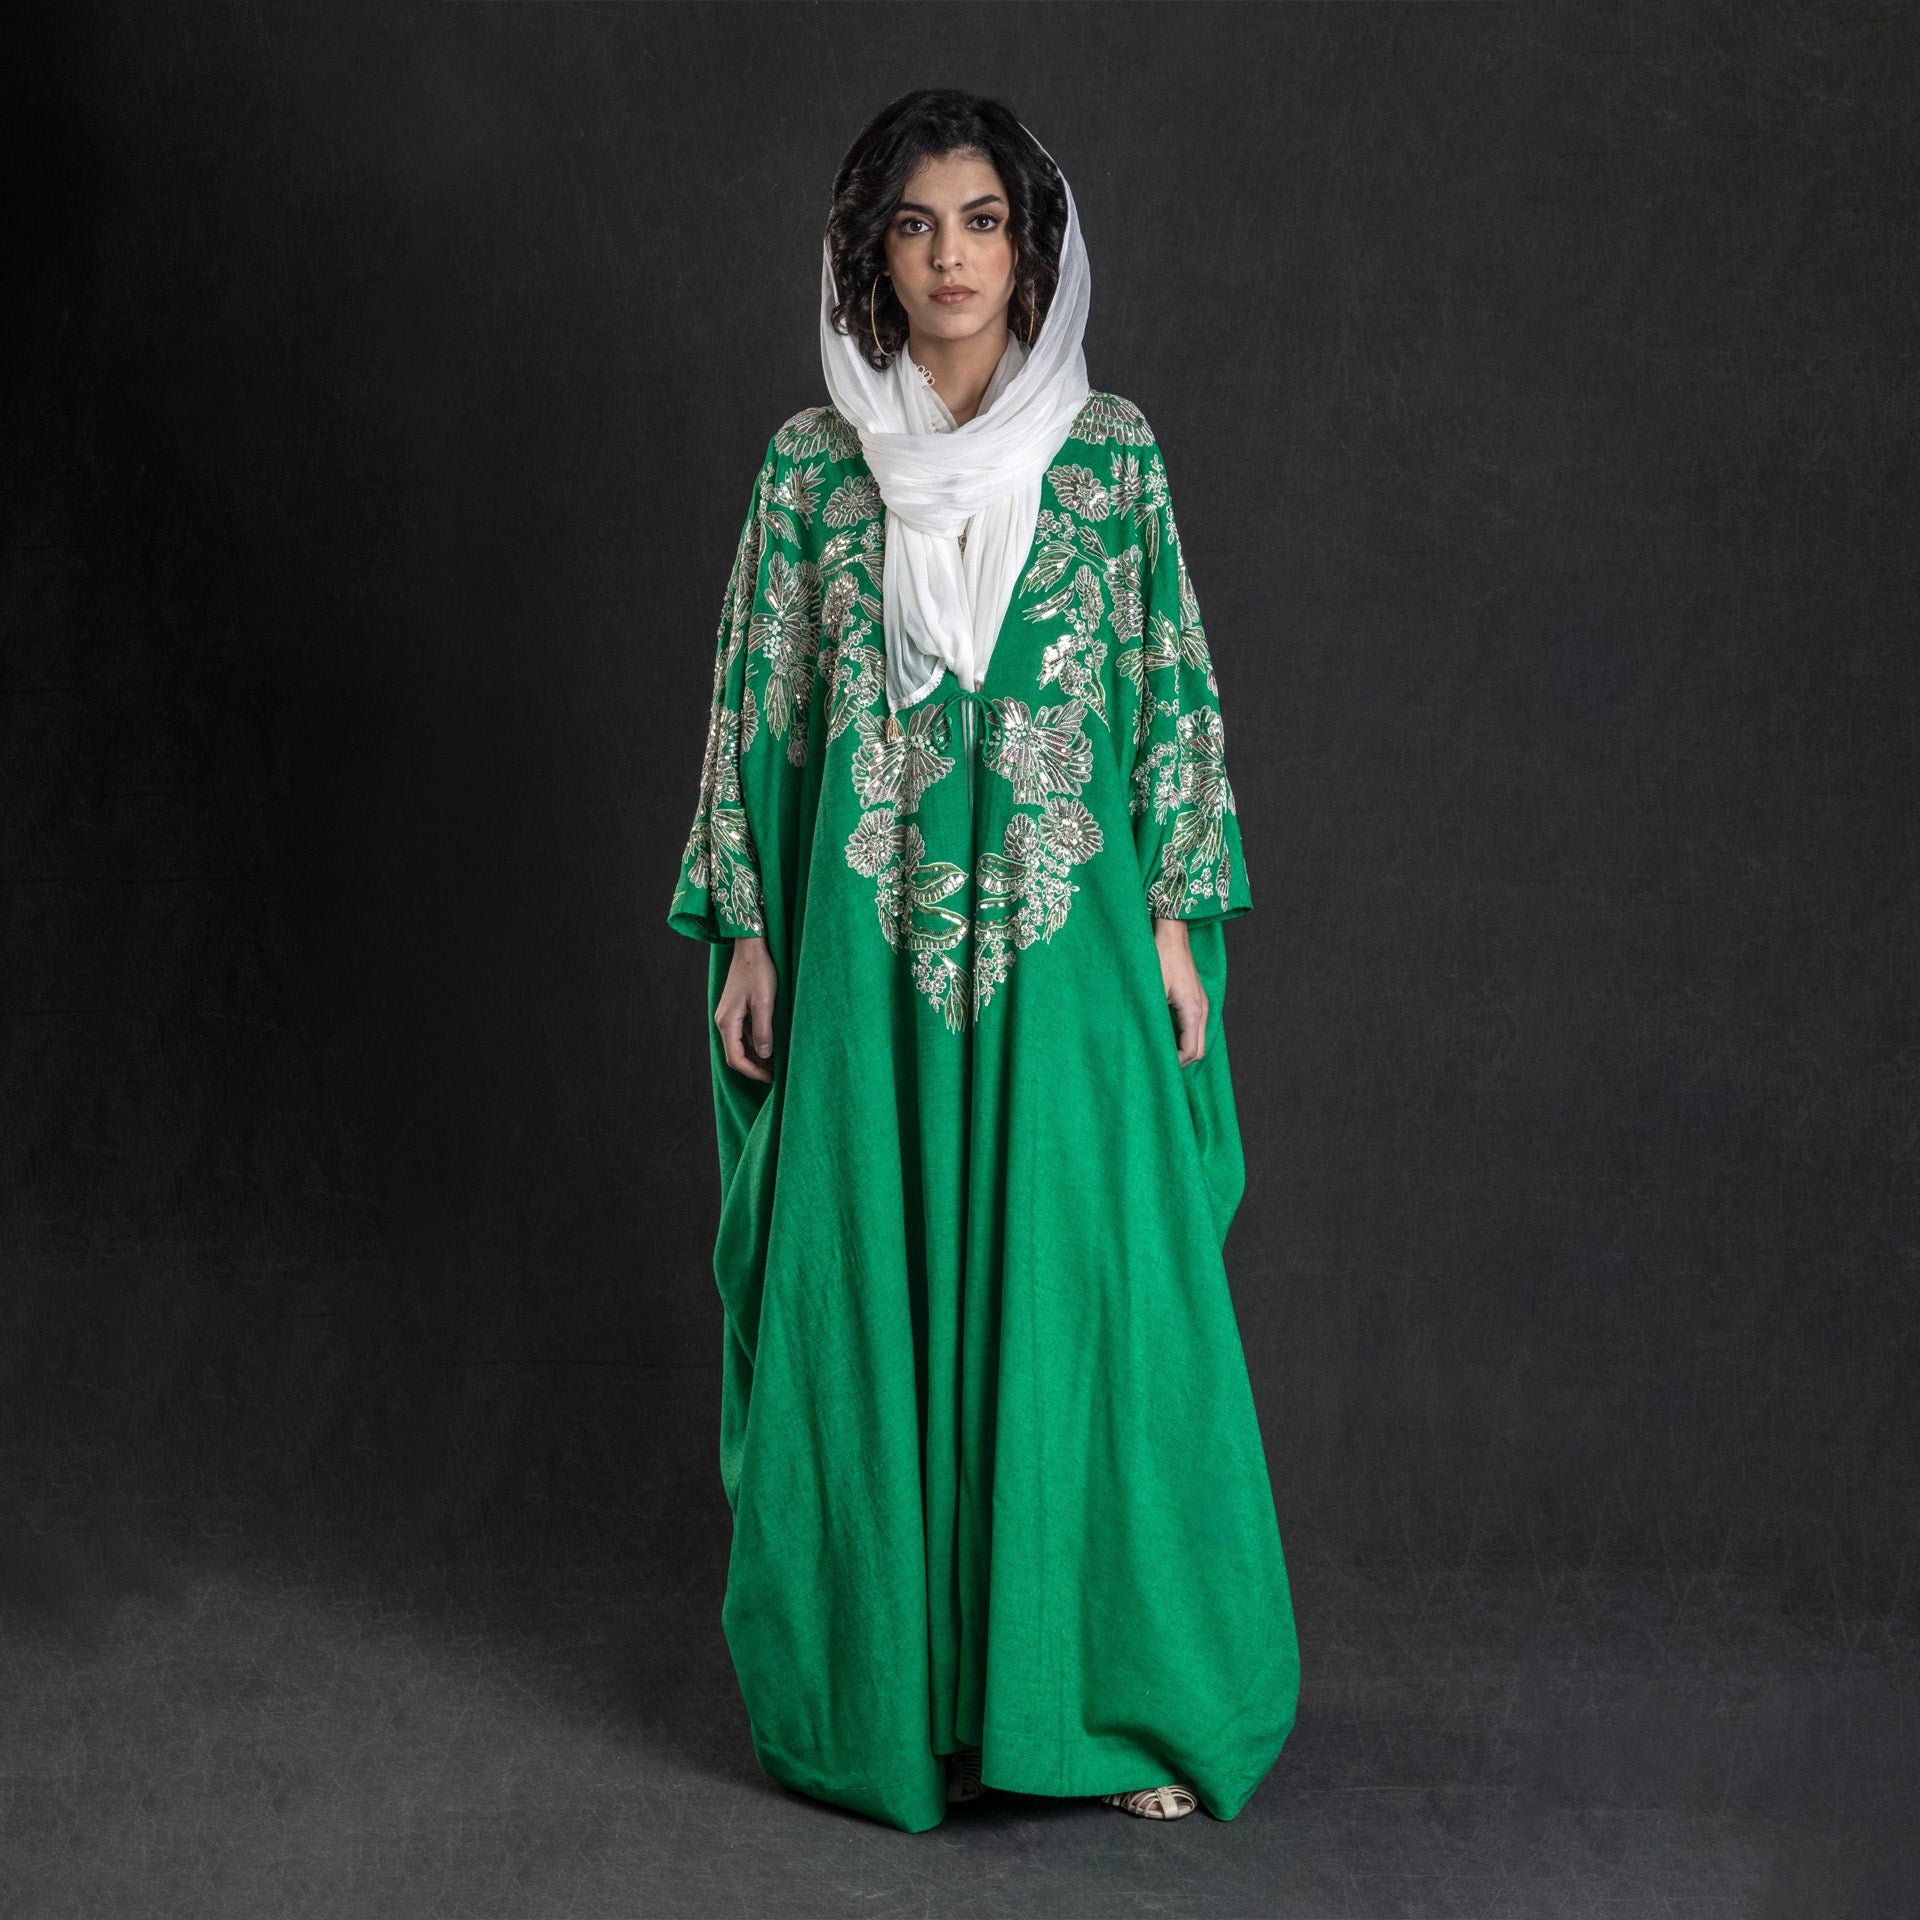 Green Zarnish Abaya with Embroidery & Embellishment From Amore Mio By Hitu